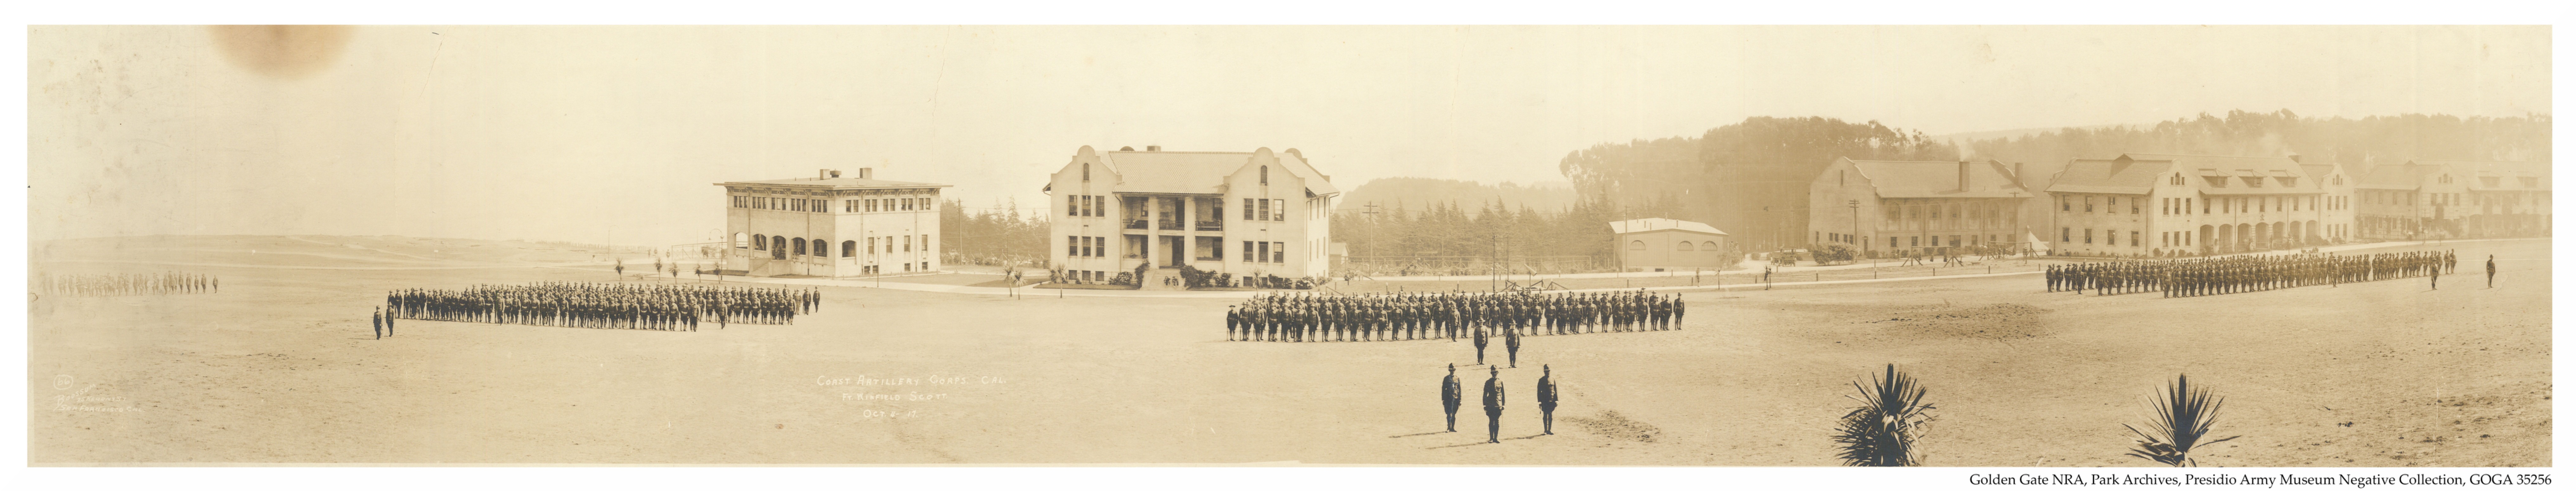 Coast Artillery Corps Review at Fort Winfield Scott presidio of San Francisco in 1917